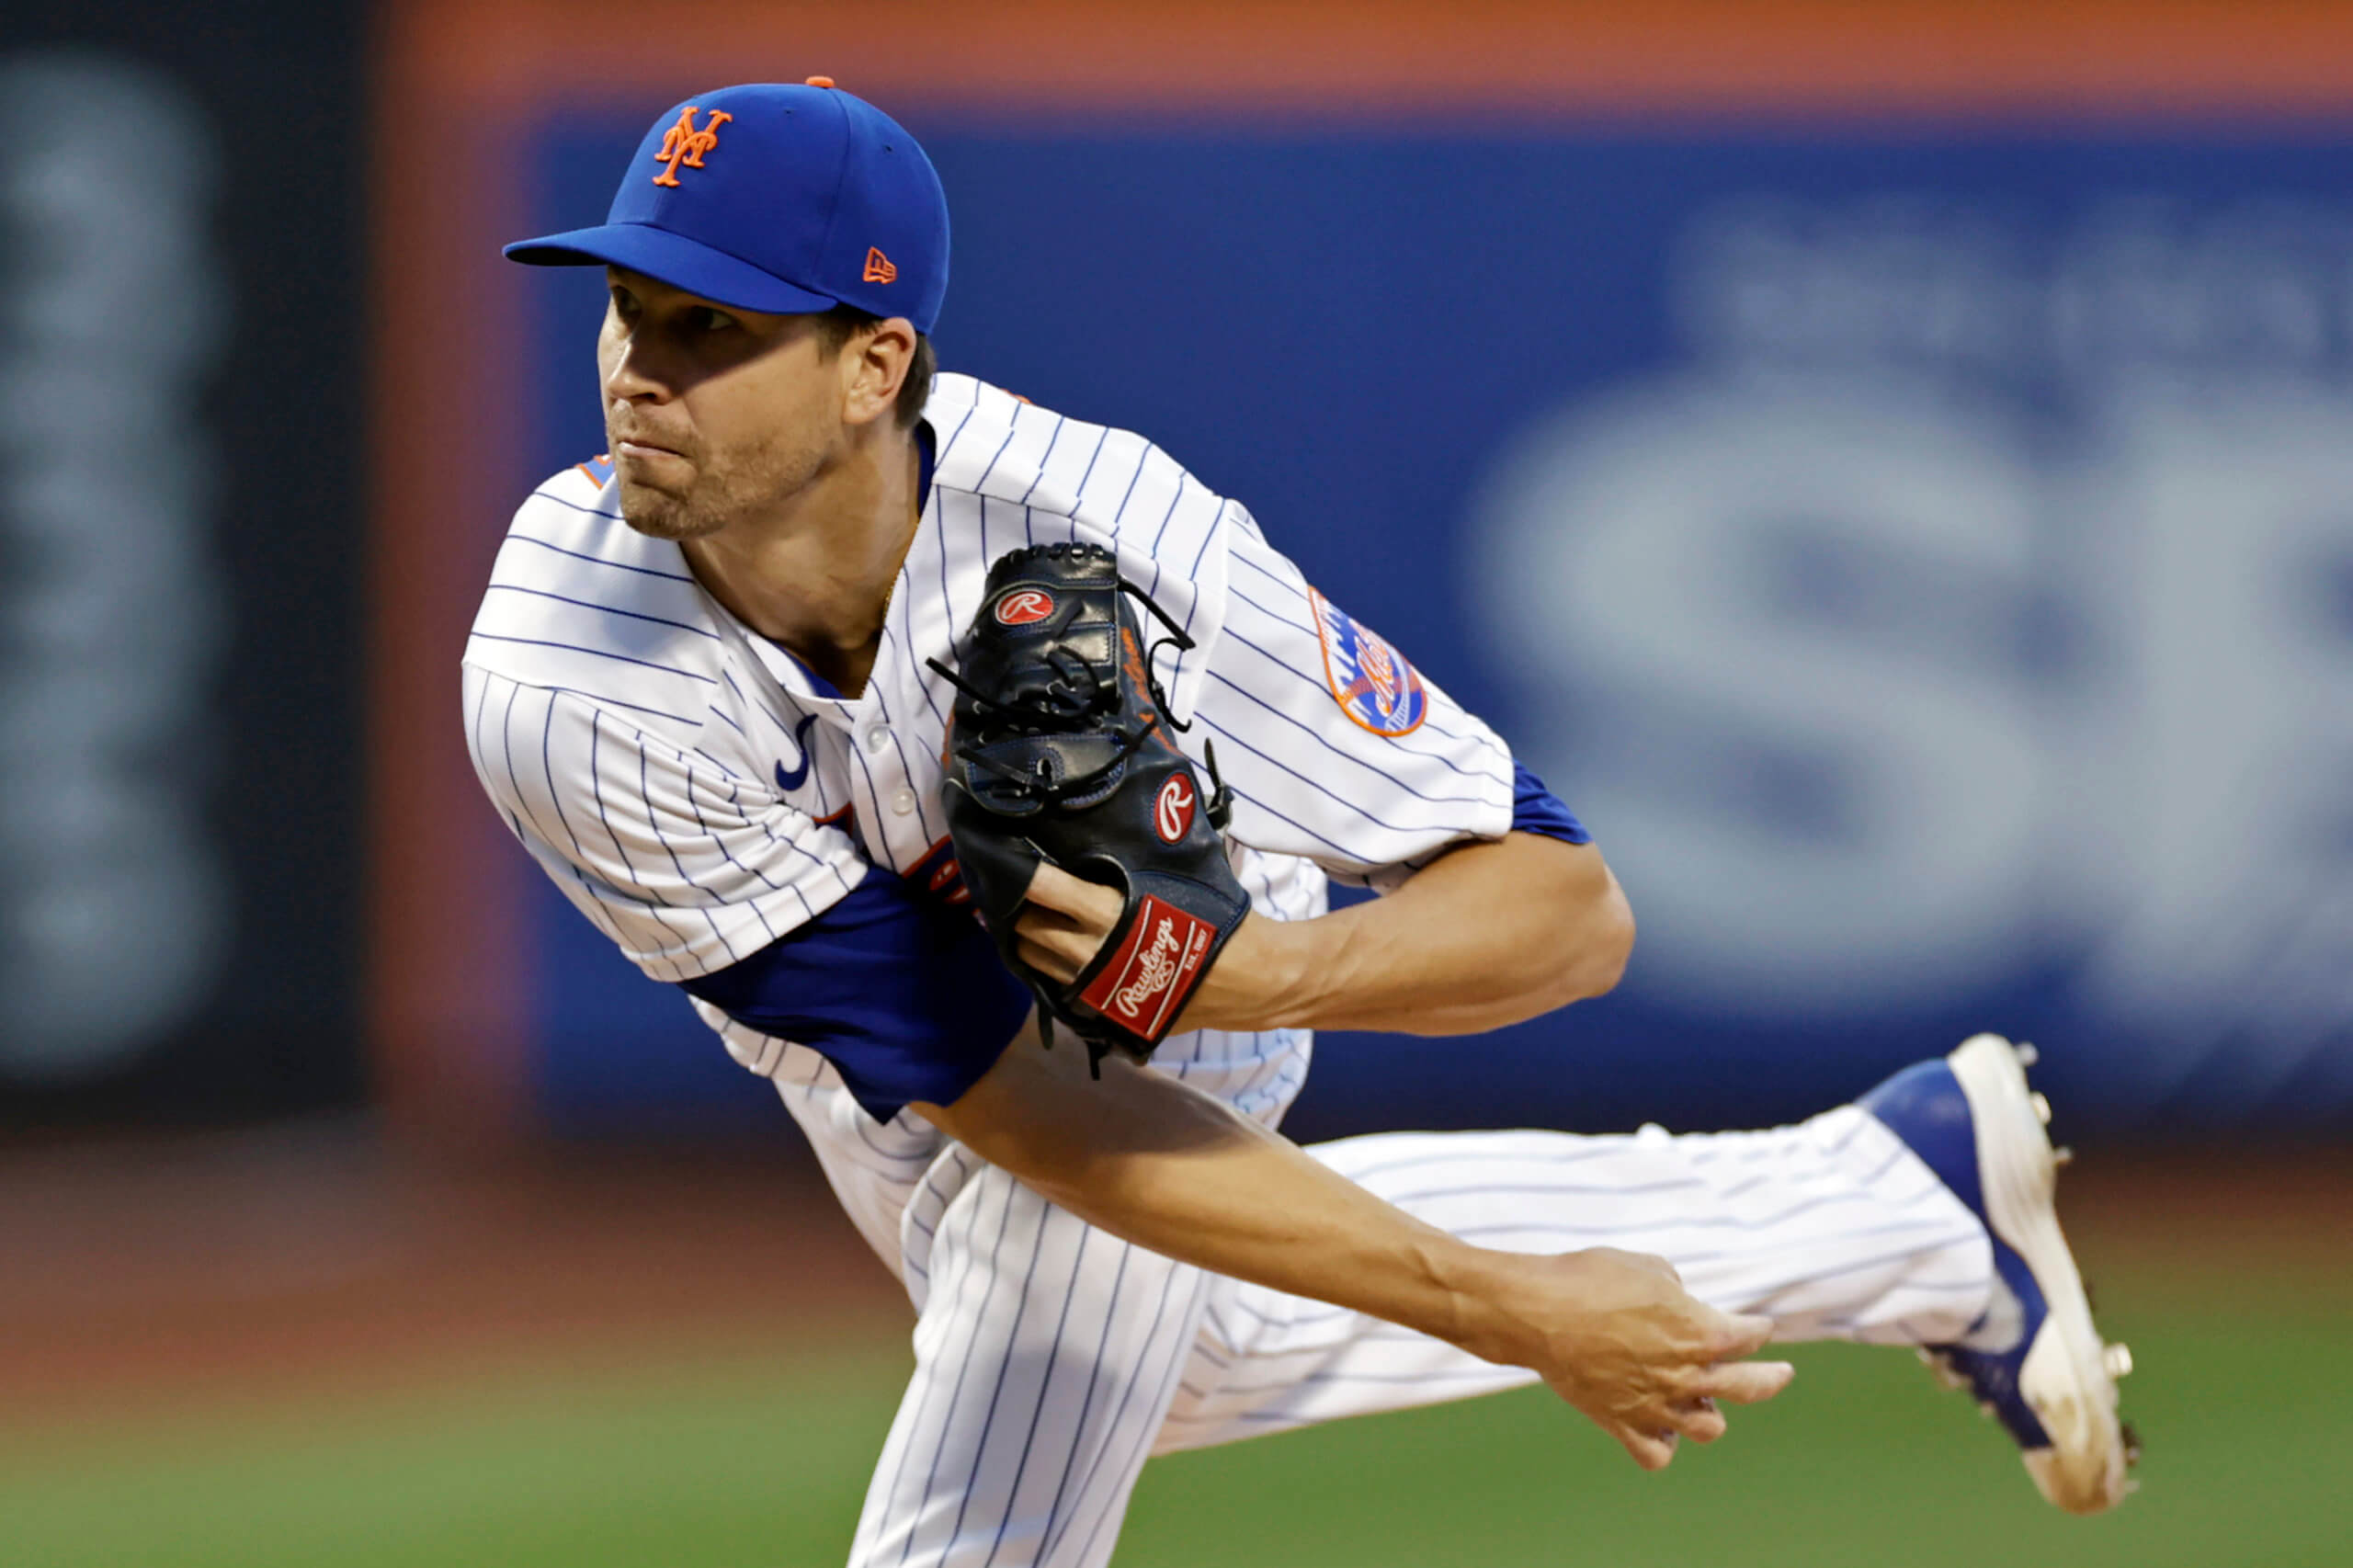 Mets offseason 2022-23: Predicting contracts for Jacob deGrom